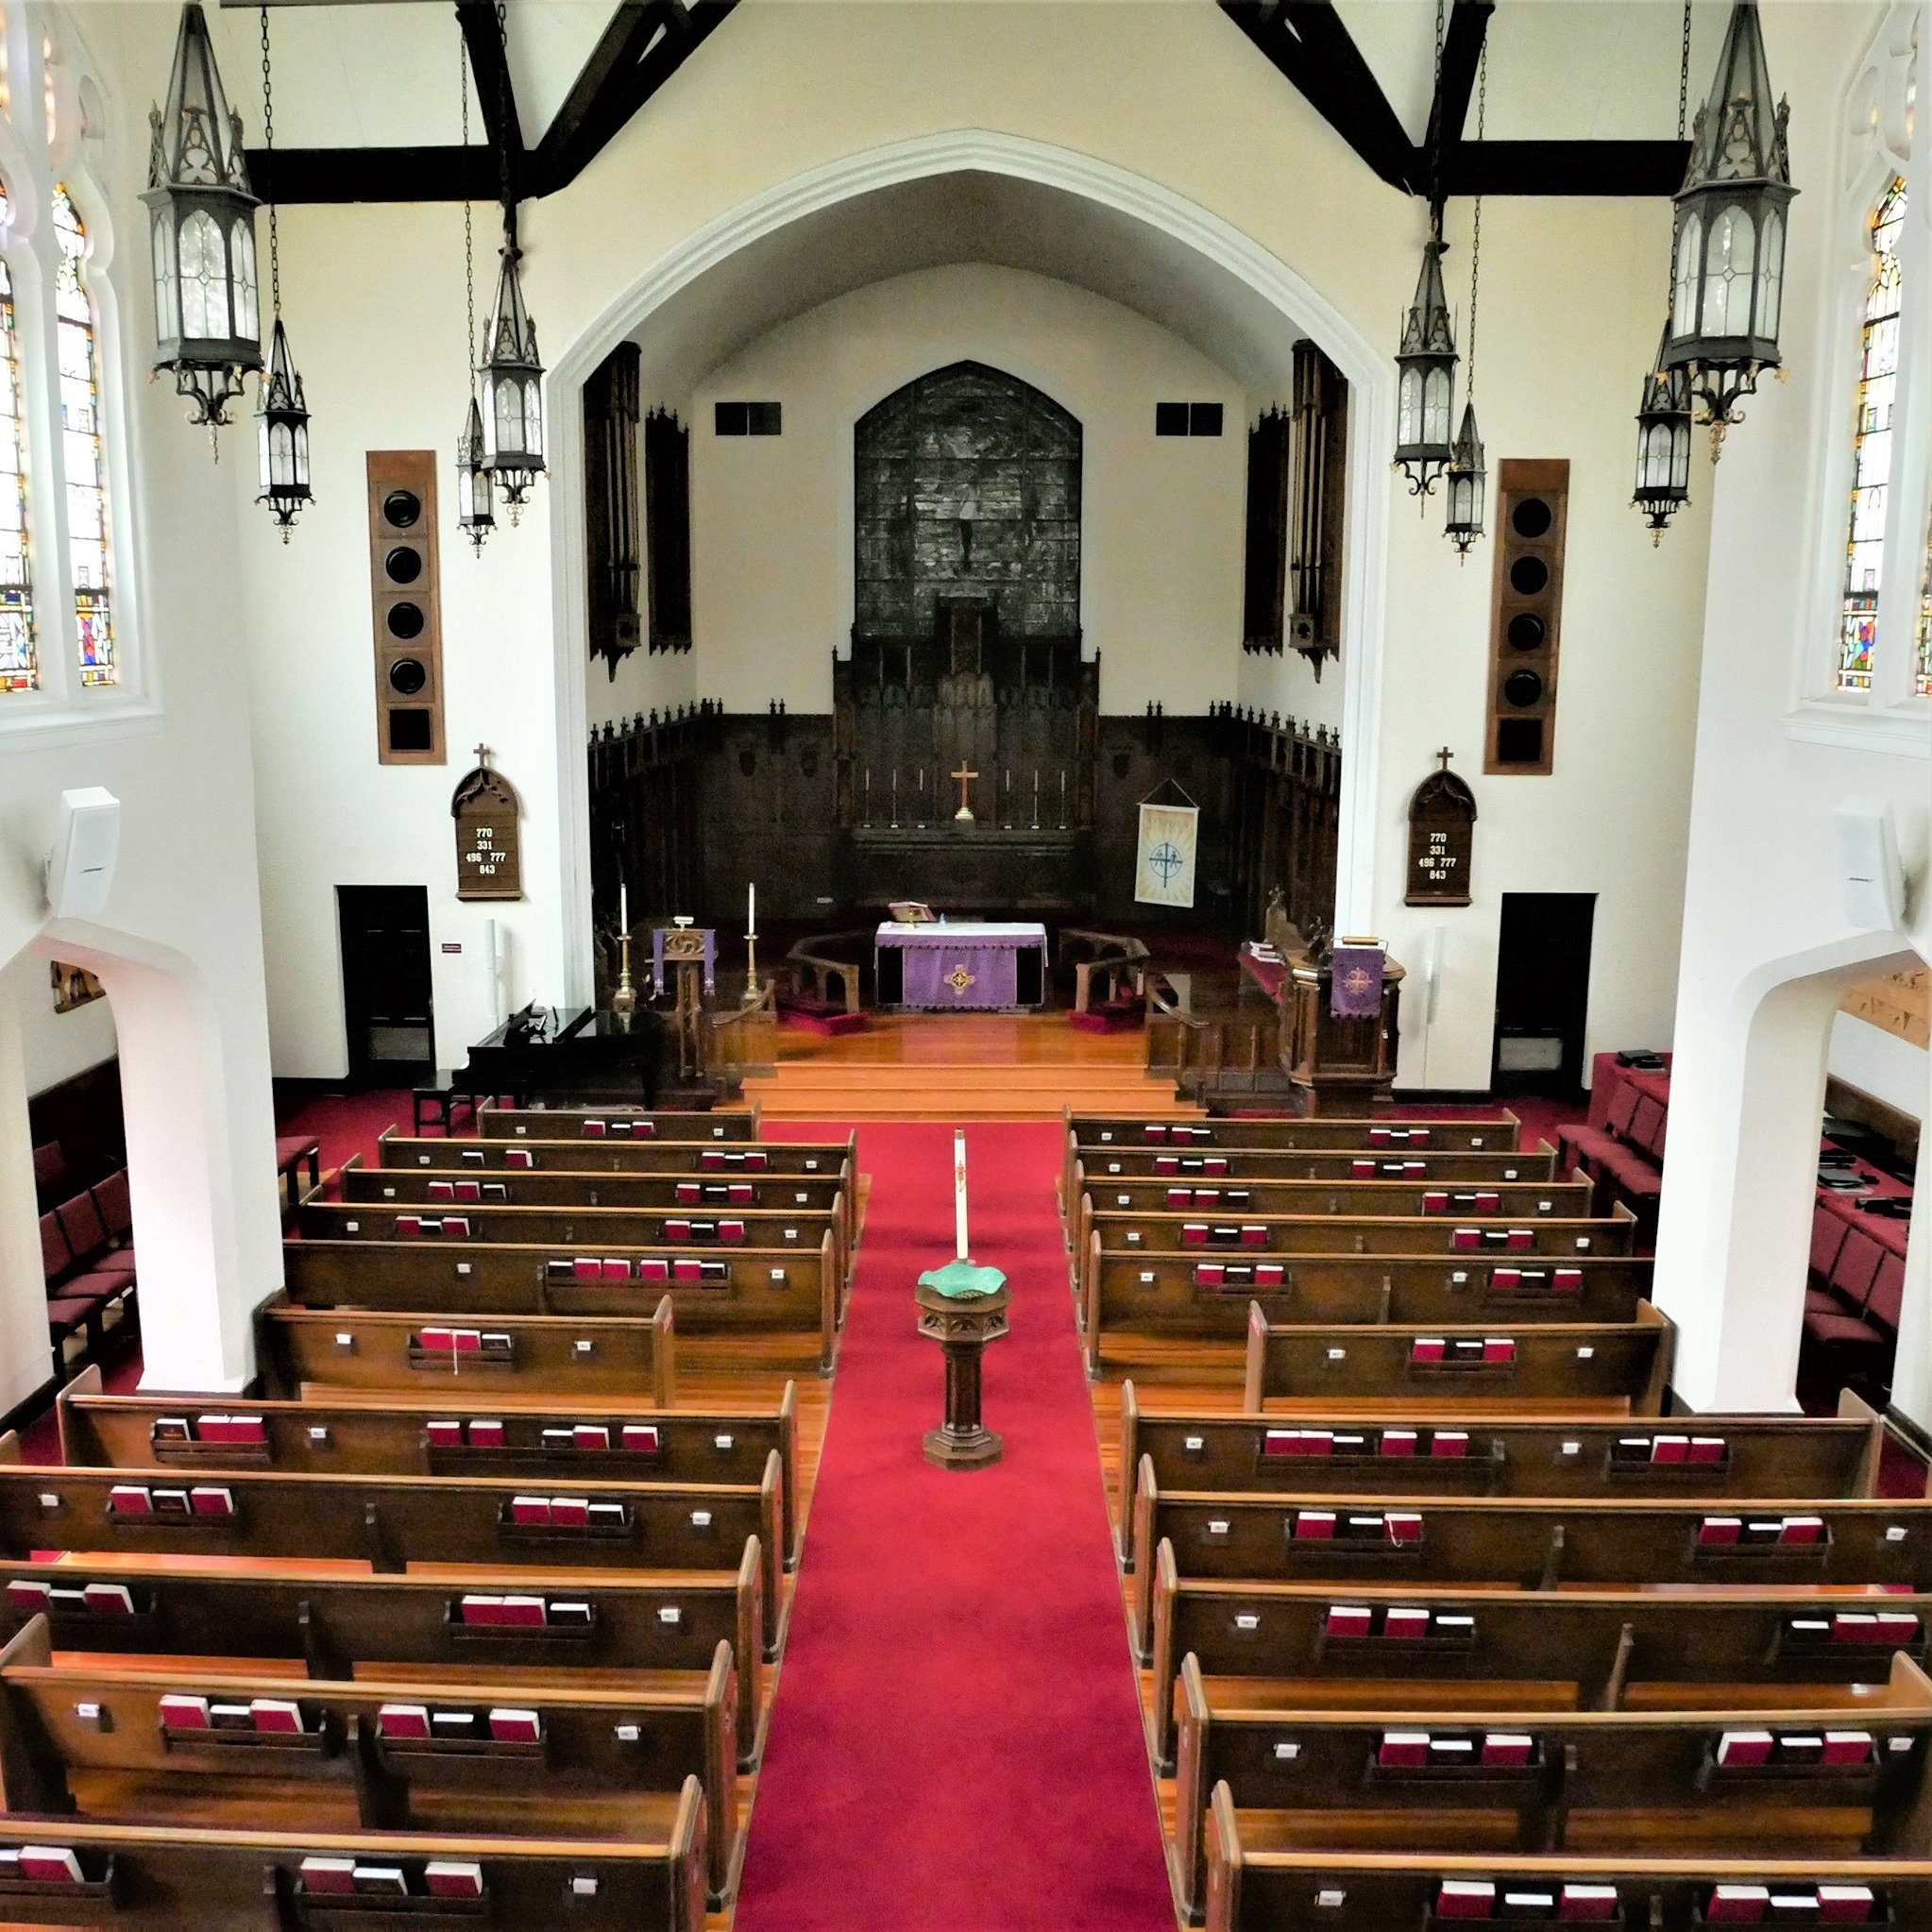 interior of church with pews and alter